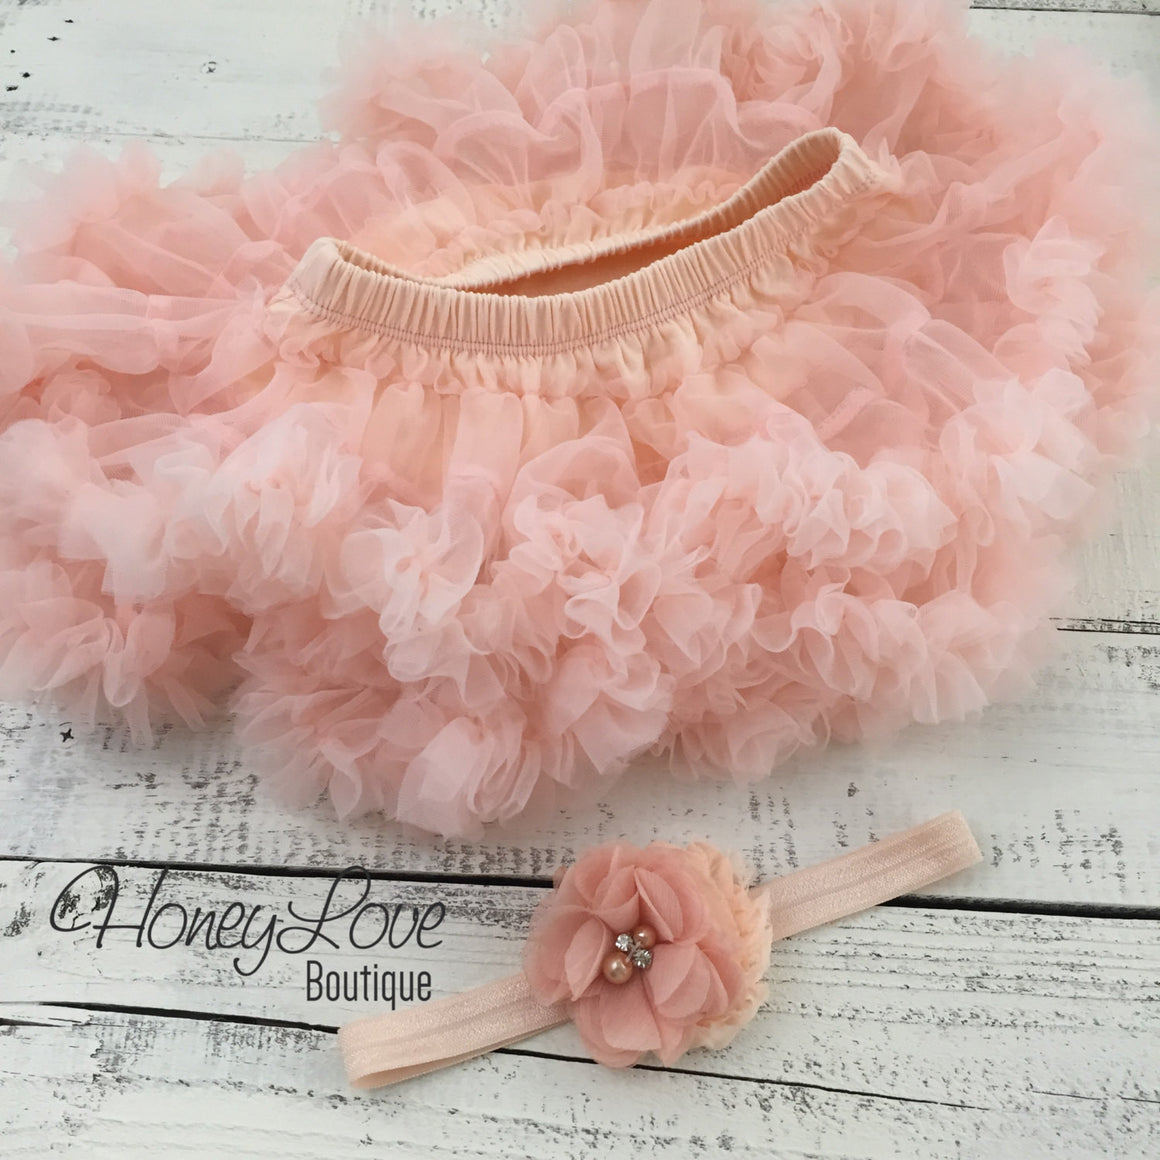 PERSONALIZED Name Outfit - Gold Glitter and Peach Pettiskirt - HoneyLoveBoutique